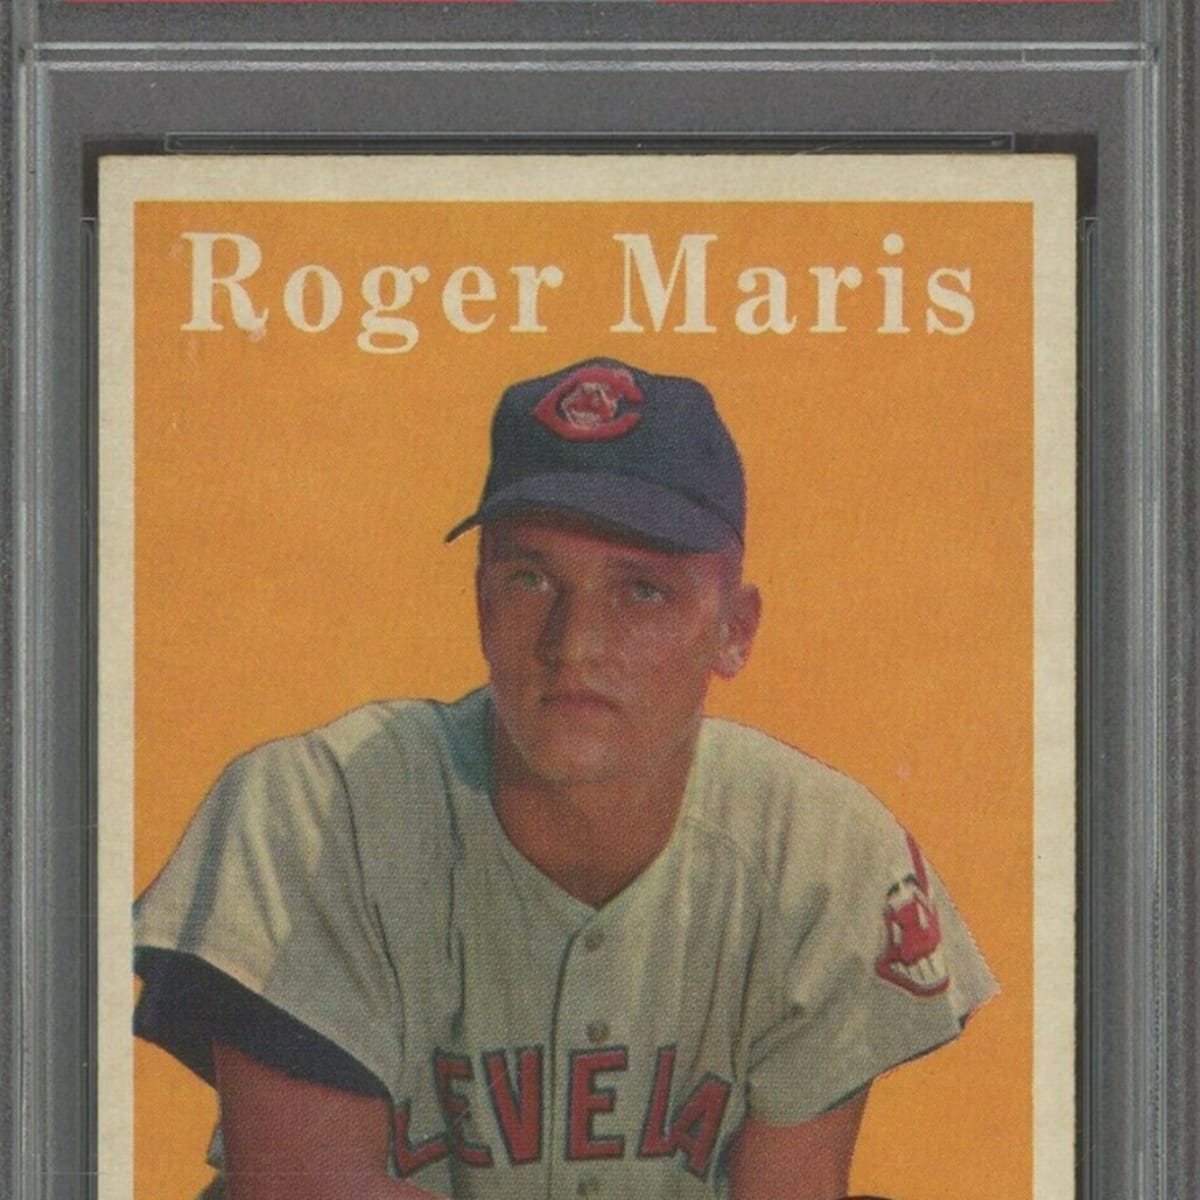 Roger Maris cards, World Series tickets and NFL kickers good